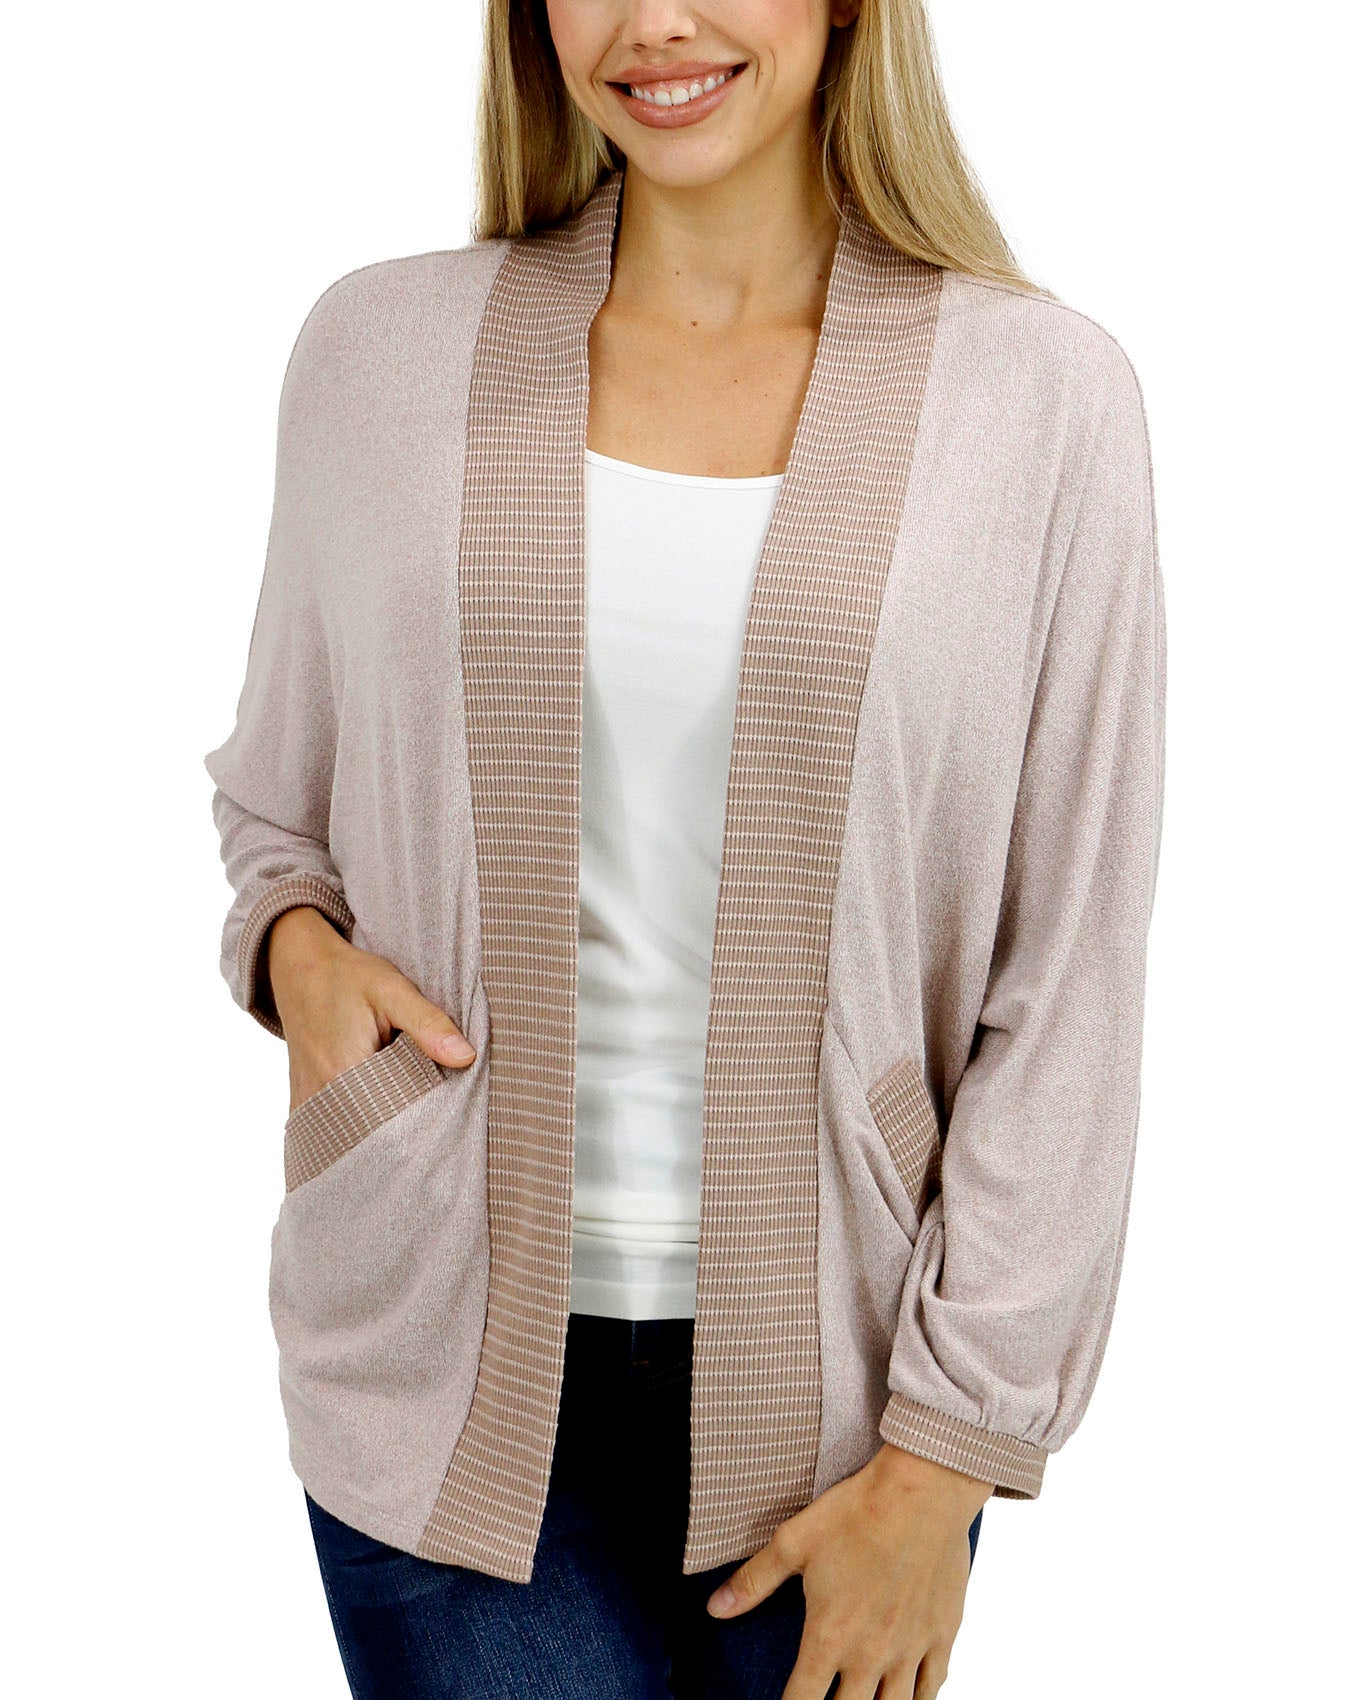 Buttery Soft Blushing Fawn Cocoon Cardi - Grace and Lace